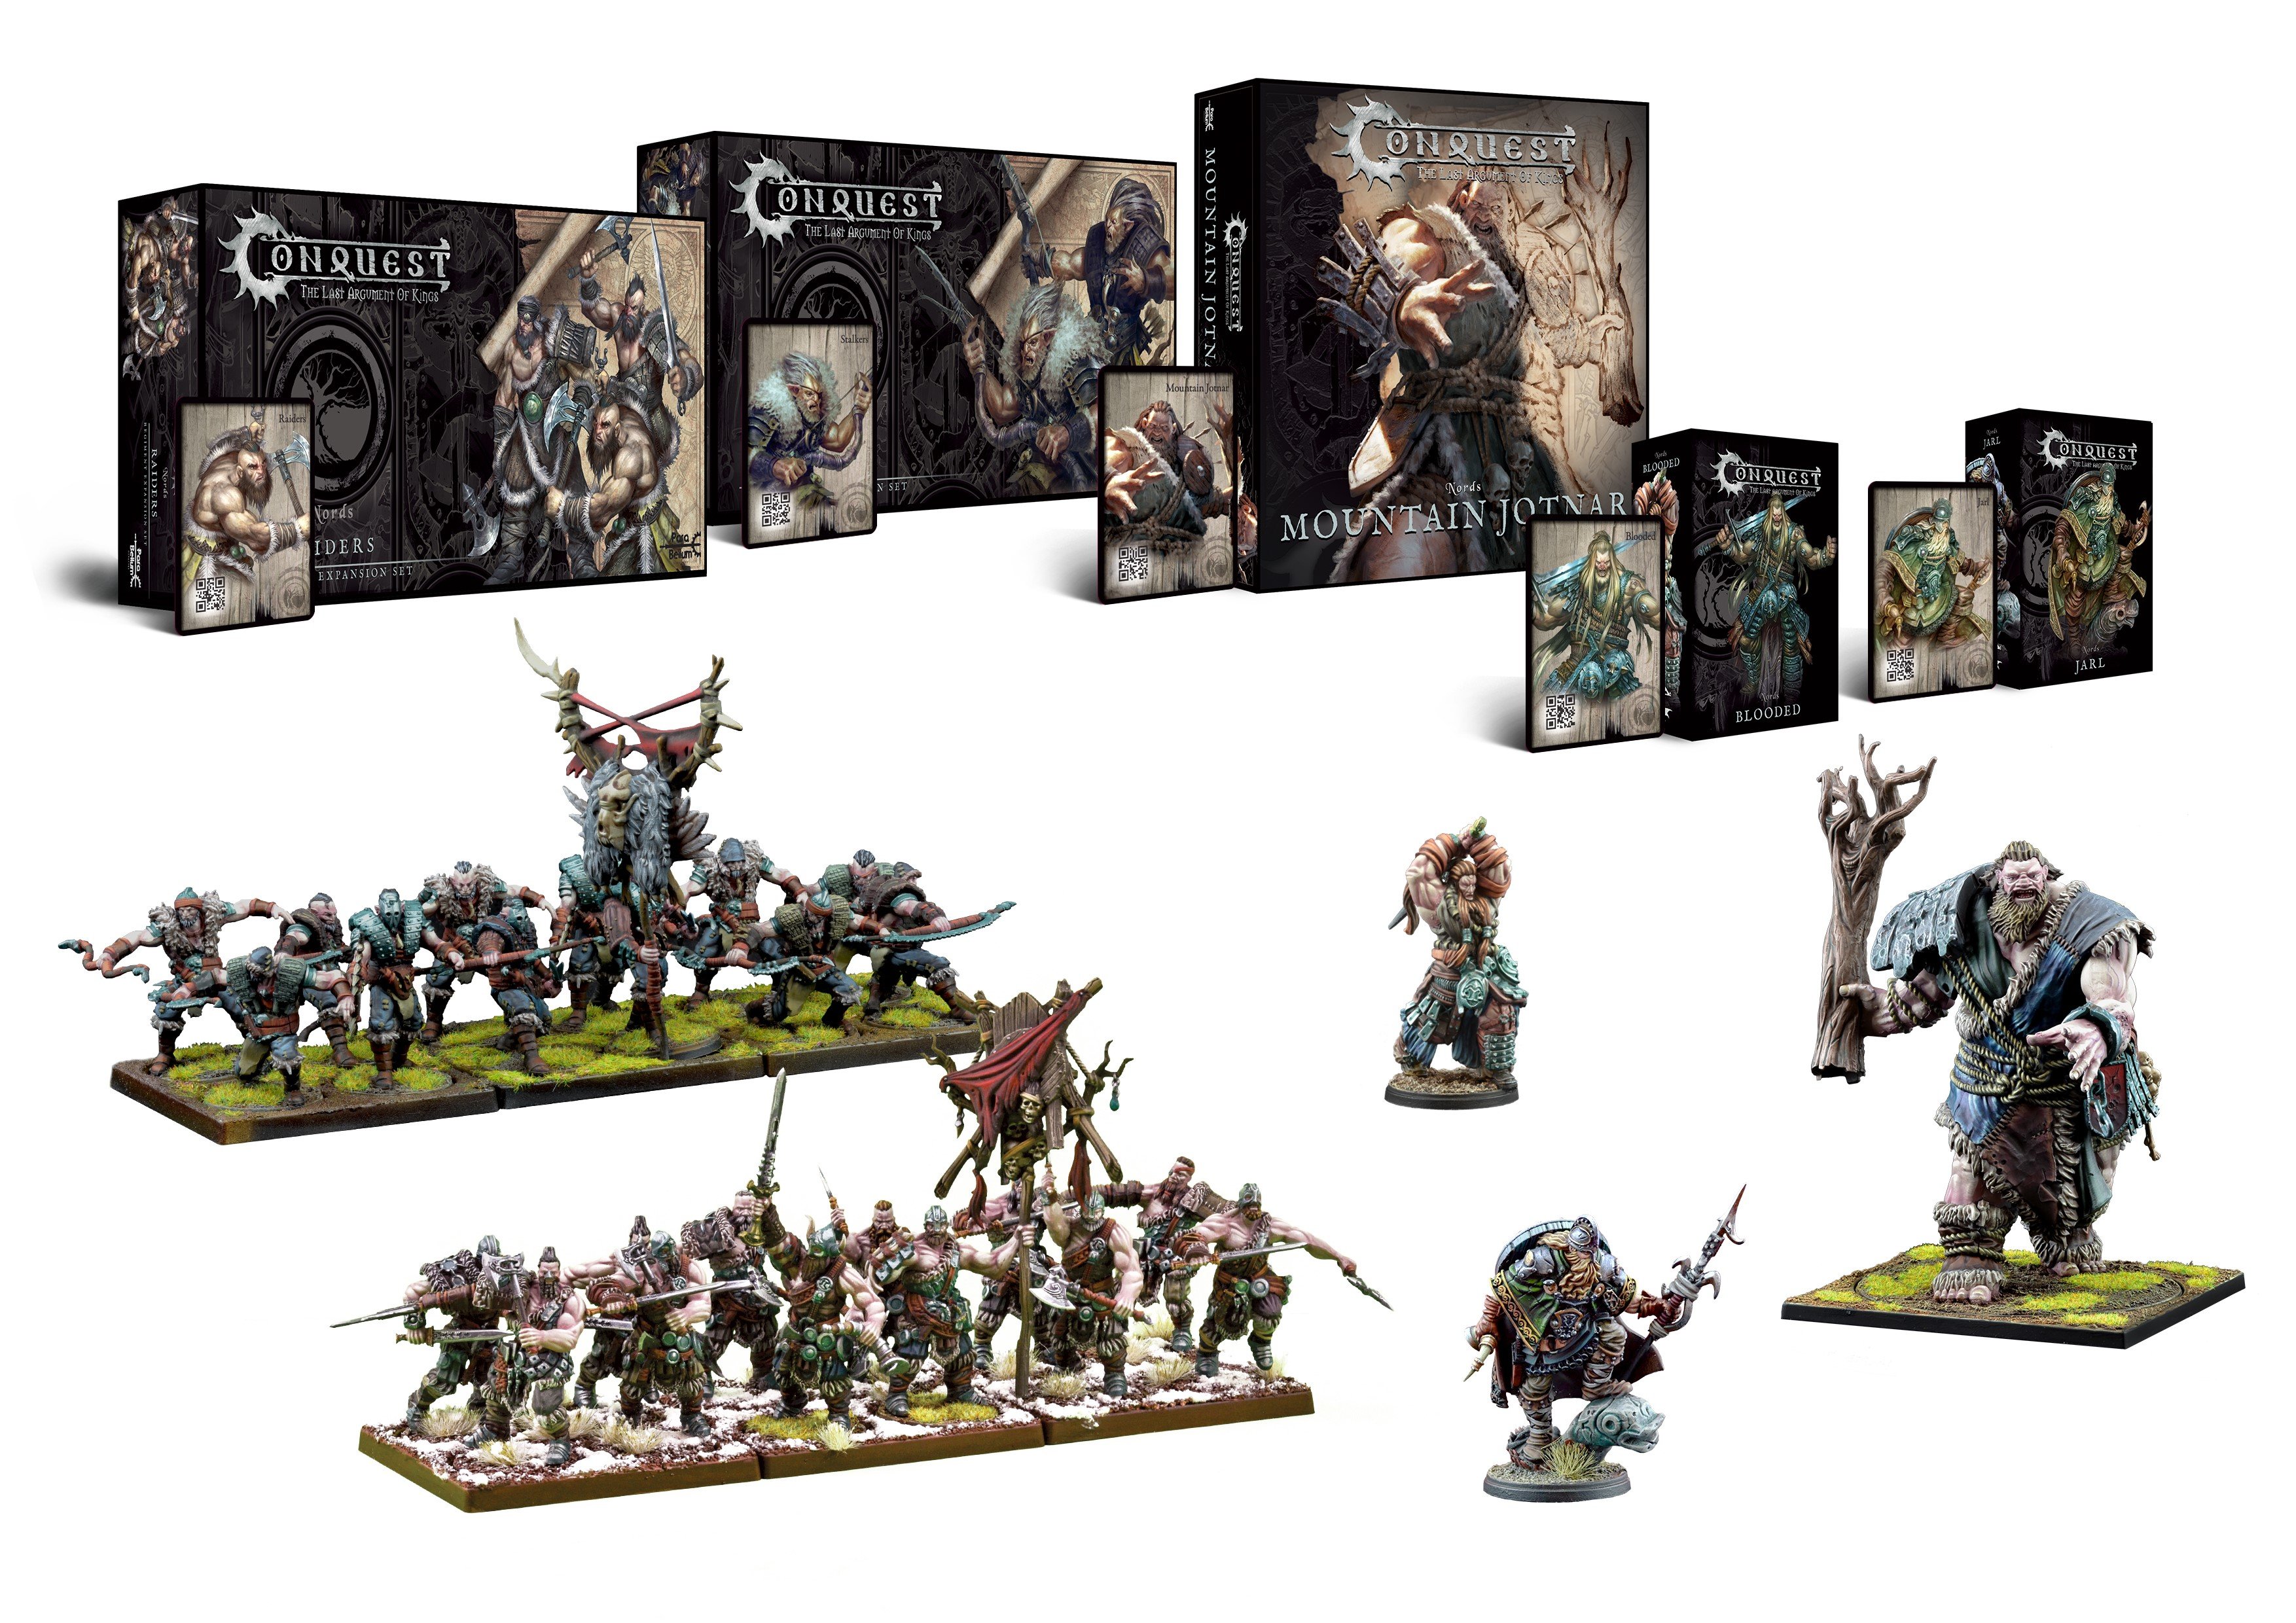 Nords Releases / Conquest by Para Bellum Wargames Faction Four